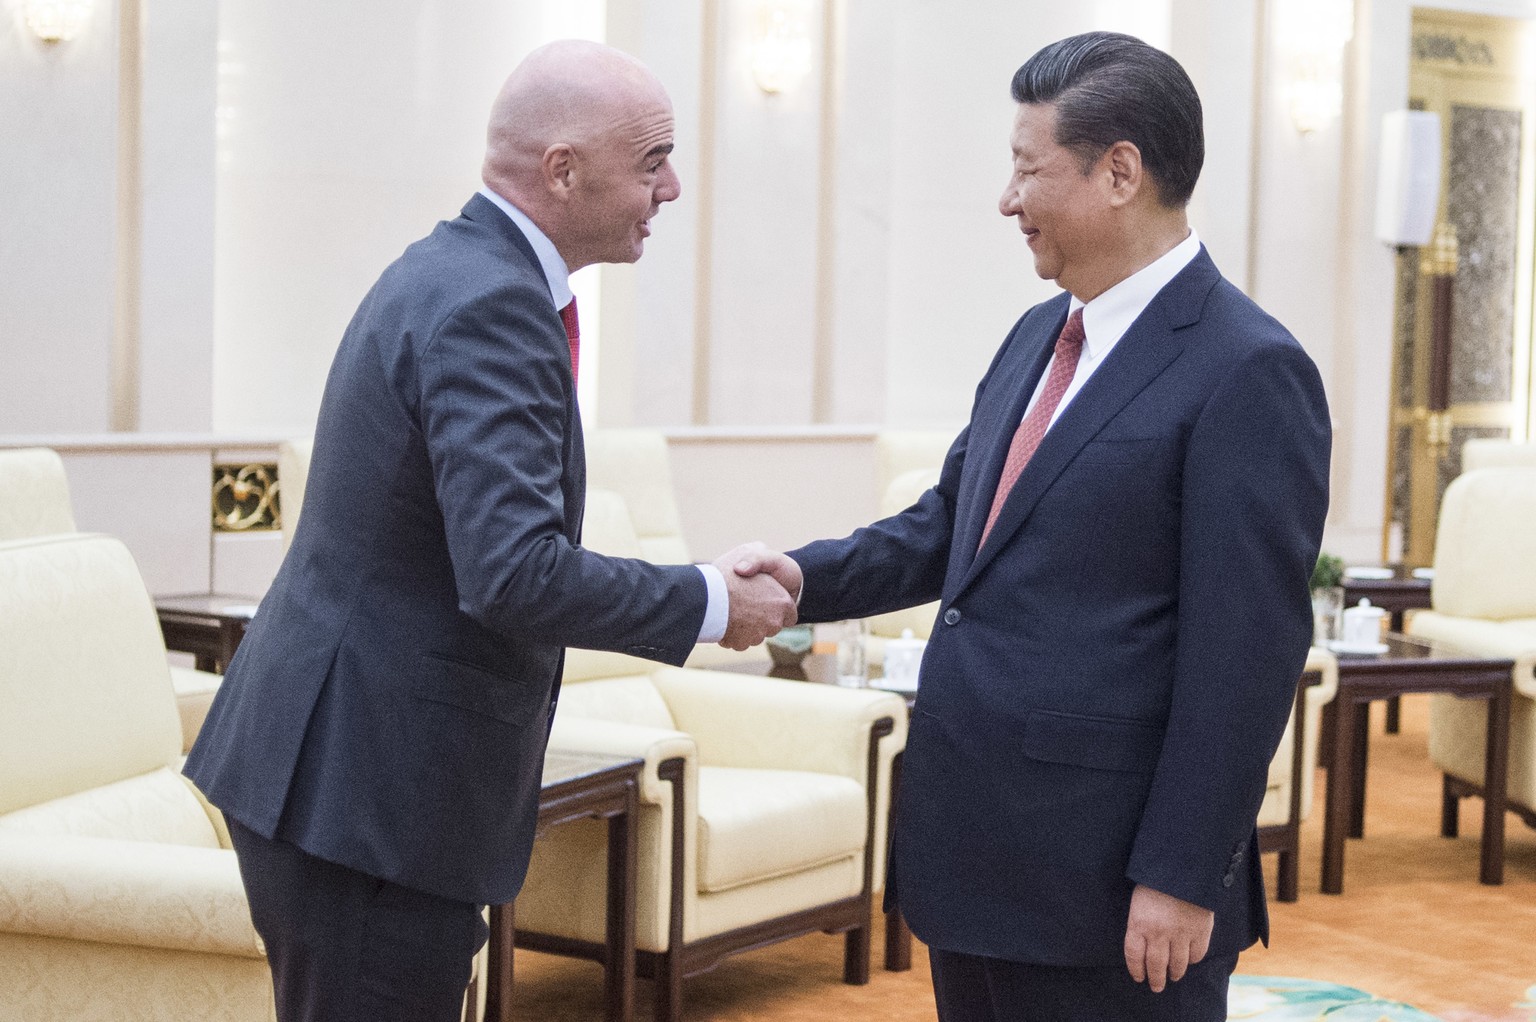 FIFA President Gianni Infantino, left, shakes hands with China&#039;s President Xi Jinping at the Great Hall of the People in Beijing on Wednesday, June 14, 2017. (Fred Dufour/Pool Photo via AP)